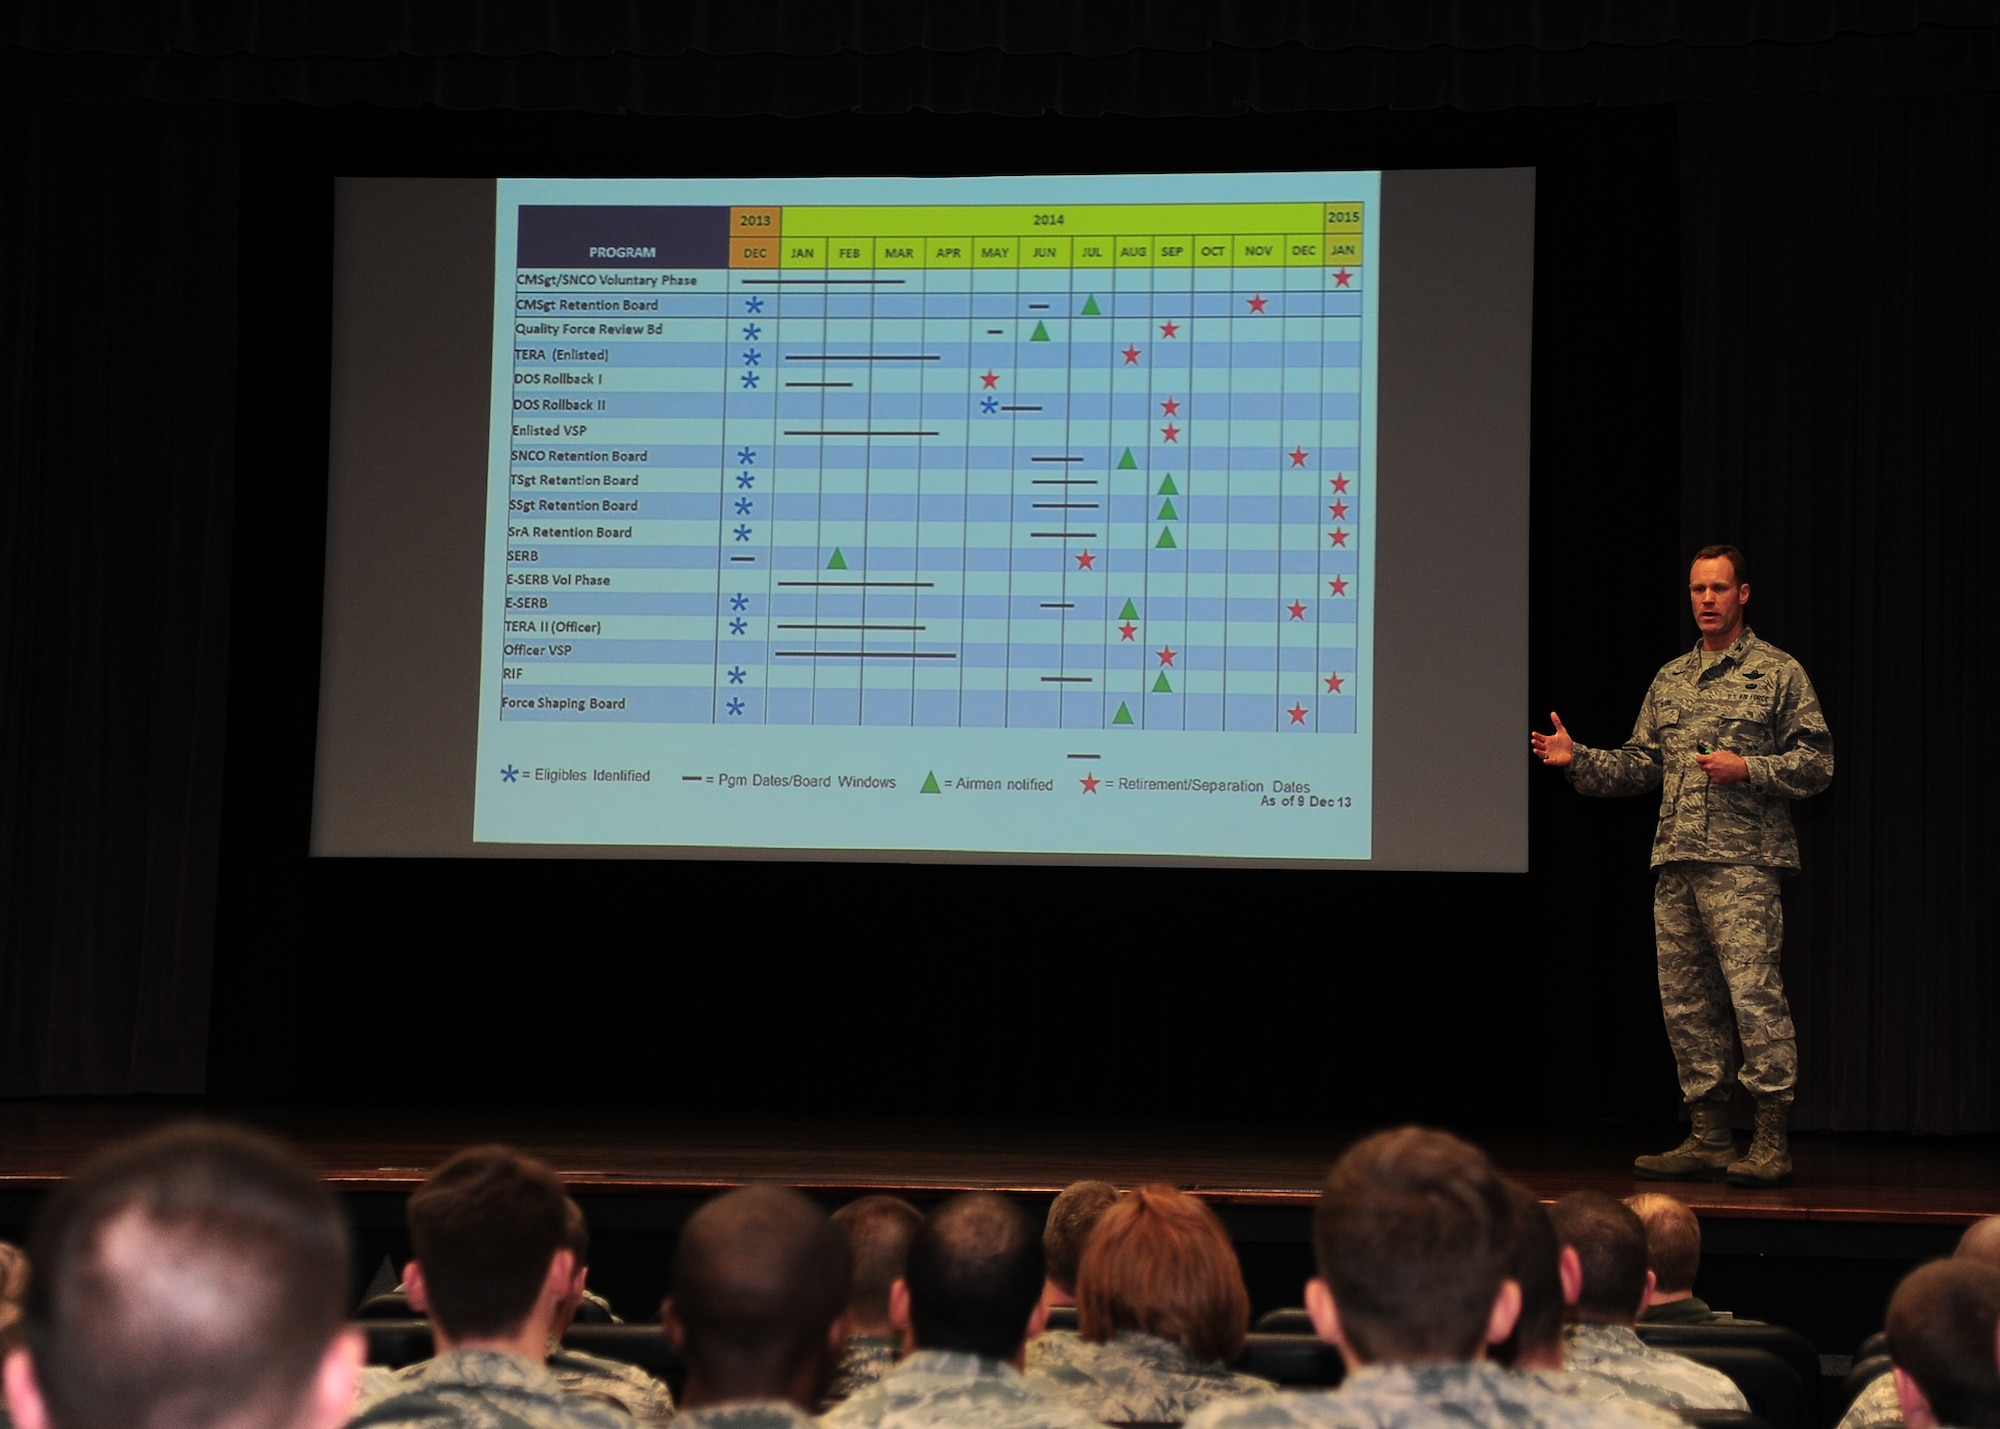 Col. Jim Sears, 14th Flying Training Wing Commander, explains the graphic on the slideshow presented behind him to the crowd at the TownHall Meeting Dec. 17 at the Kaye Auditorium. The main topic of the meeting was the upcoming 2014 Force Management programs that the United States Air Force, along with the rest of the Department of Defense, must face.